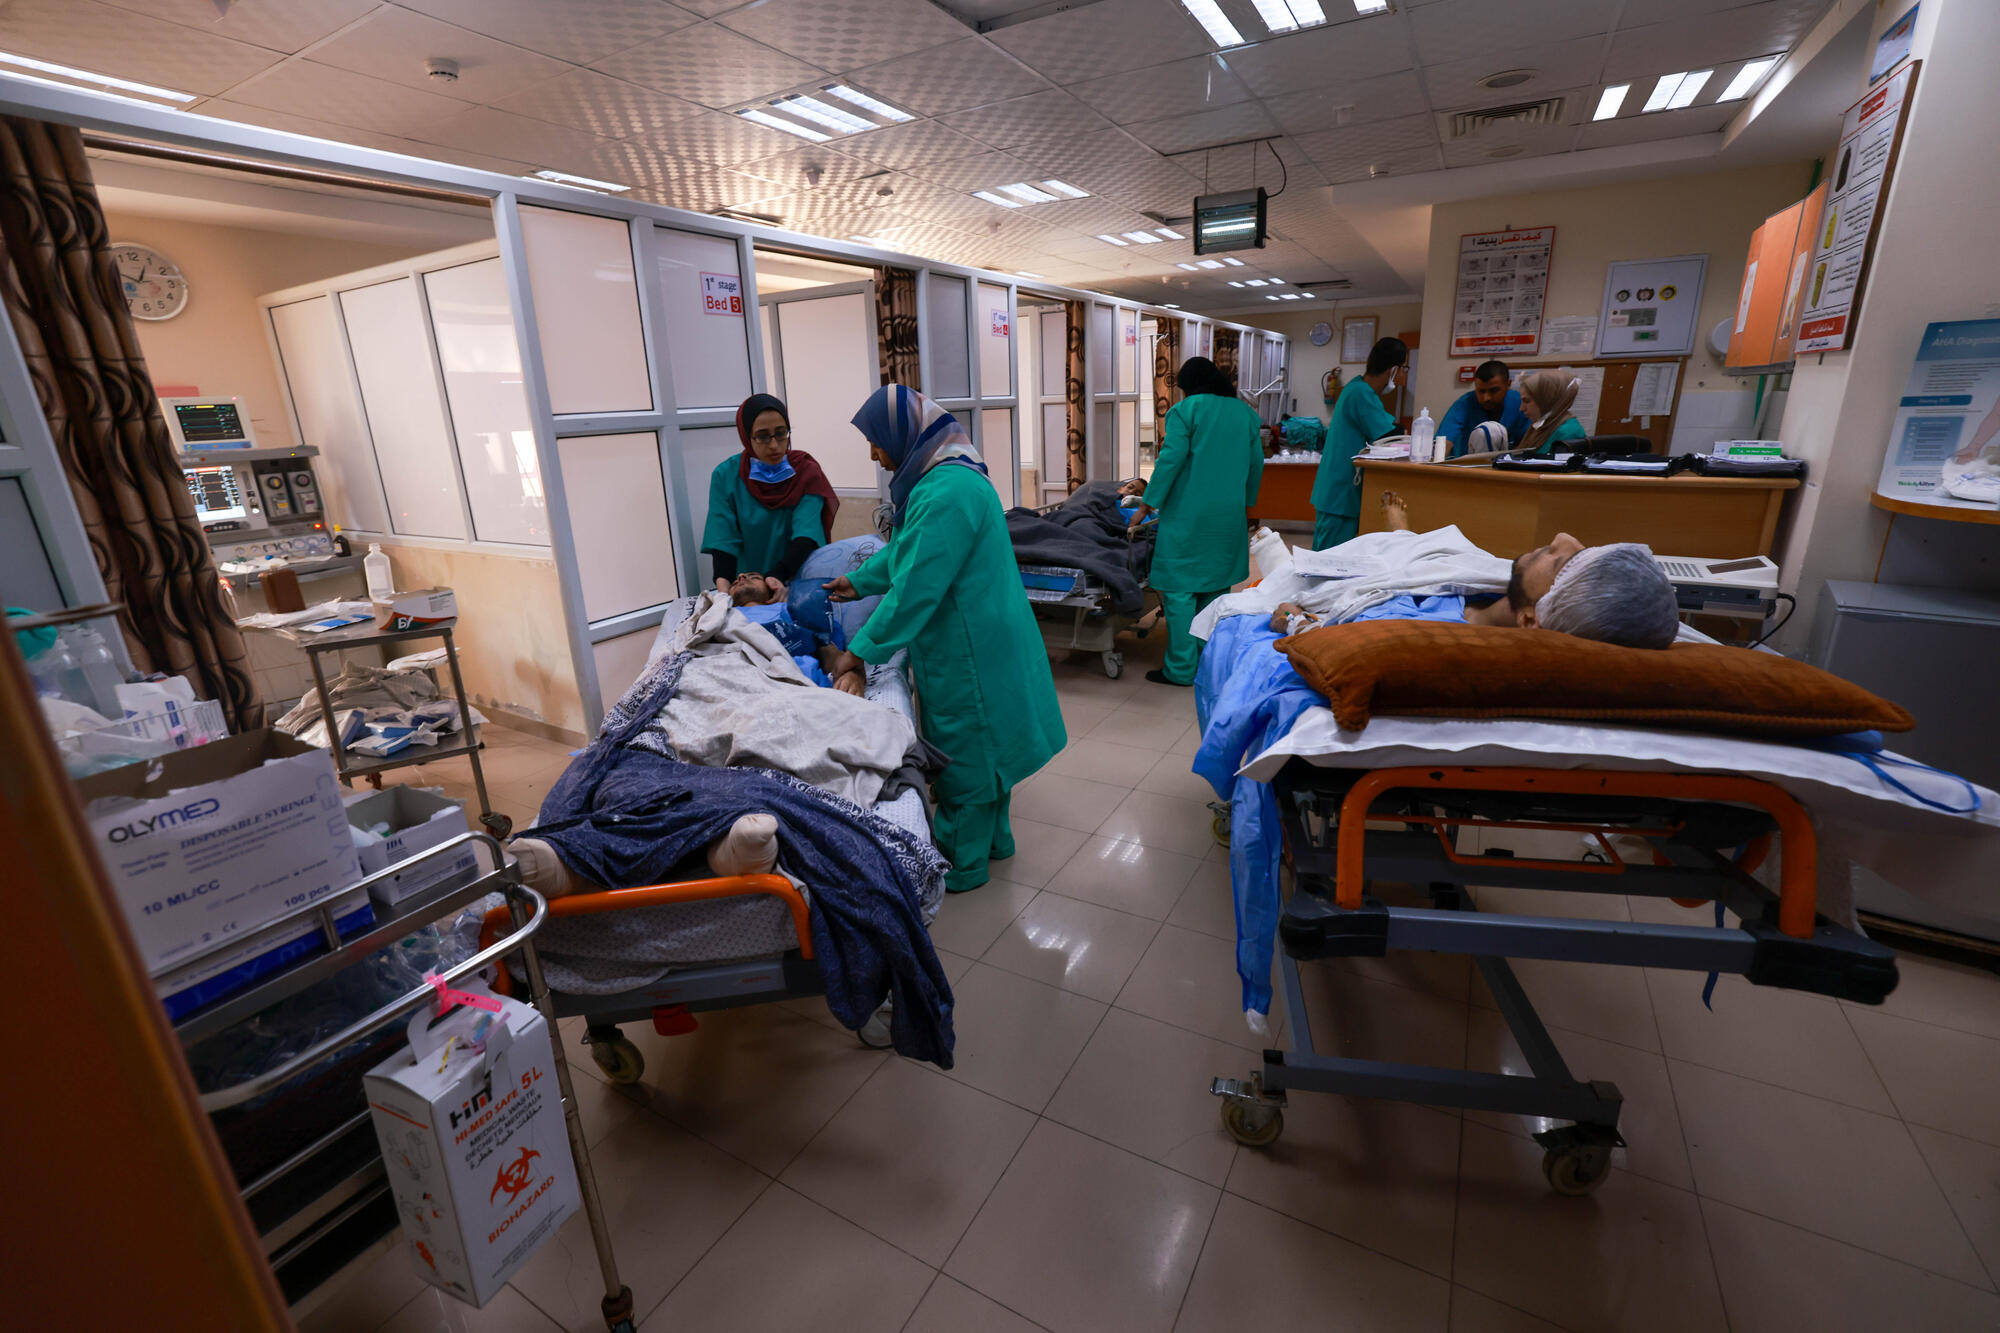 Healthcare workers in Gaza struggle with the mental health effects of a relentless conflict